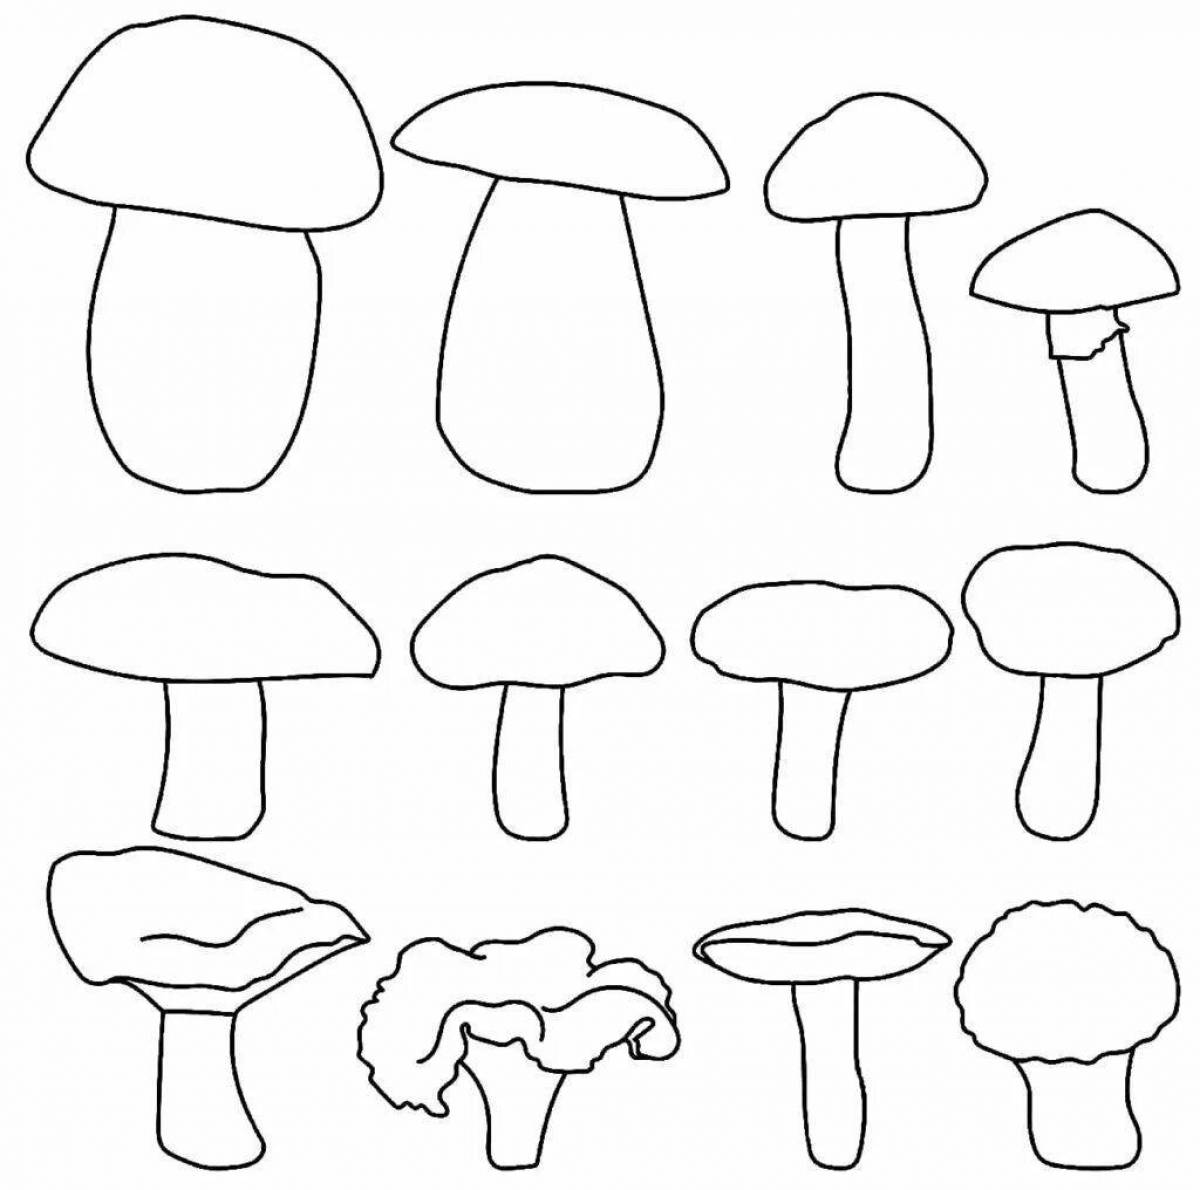 Playful mushroom coloring page for 6-7 year olds